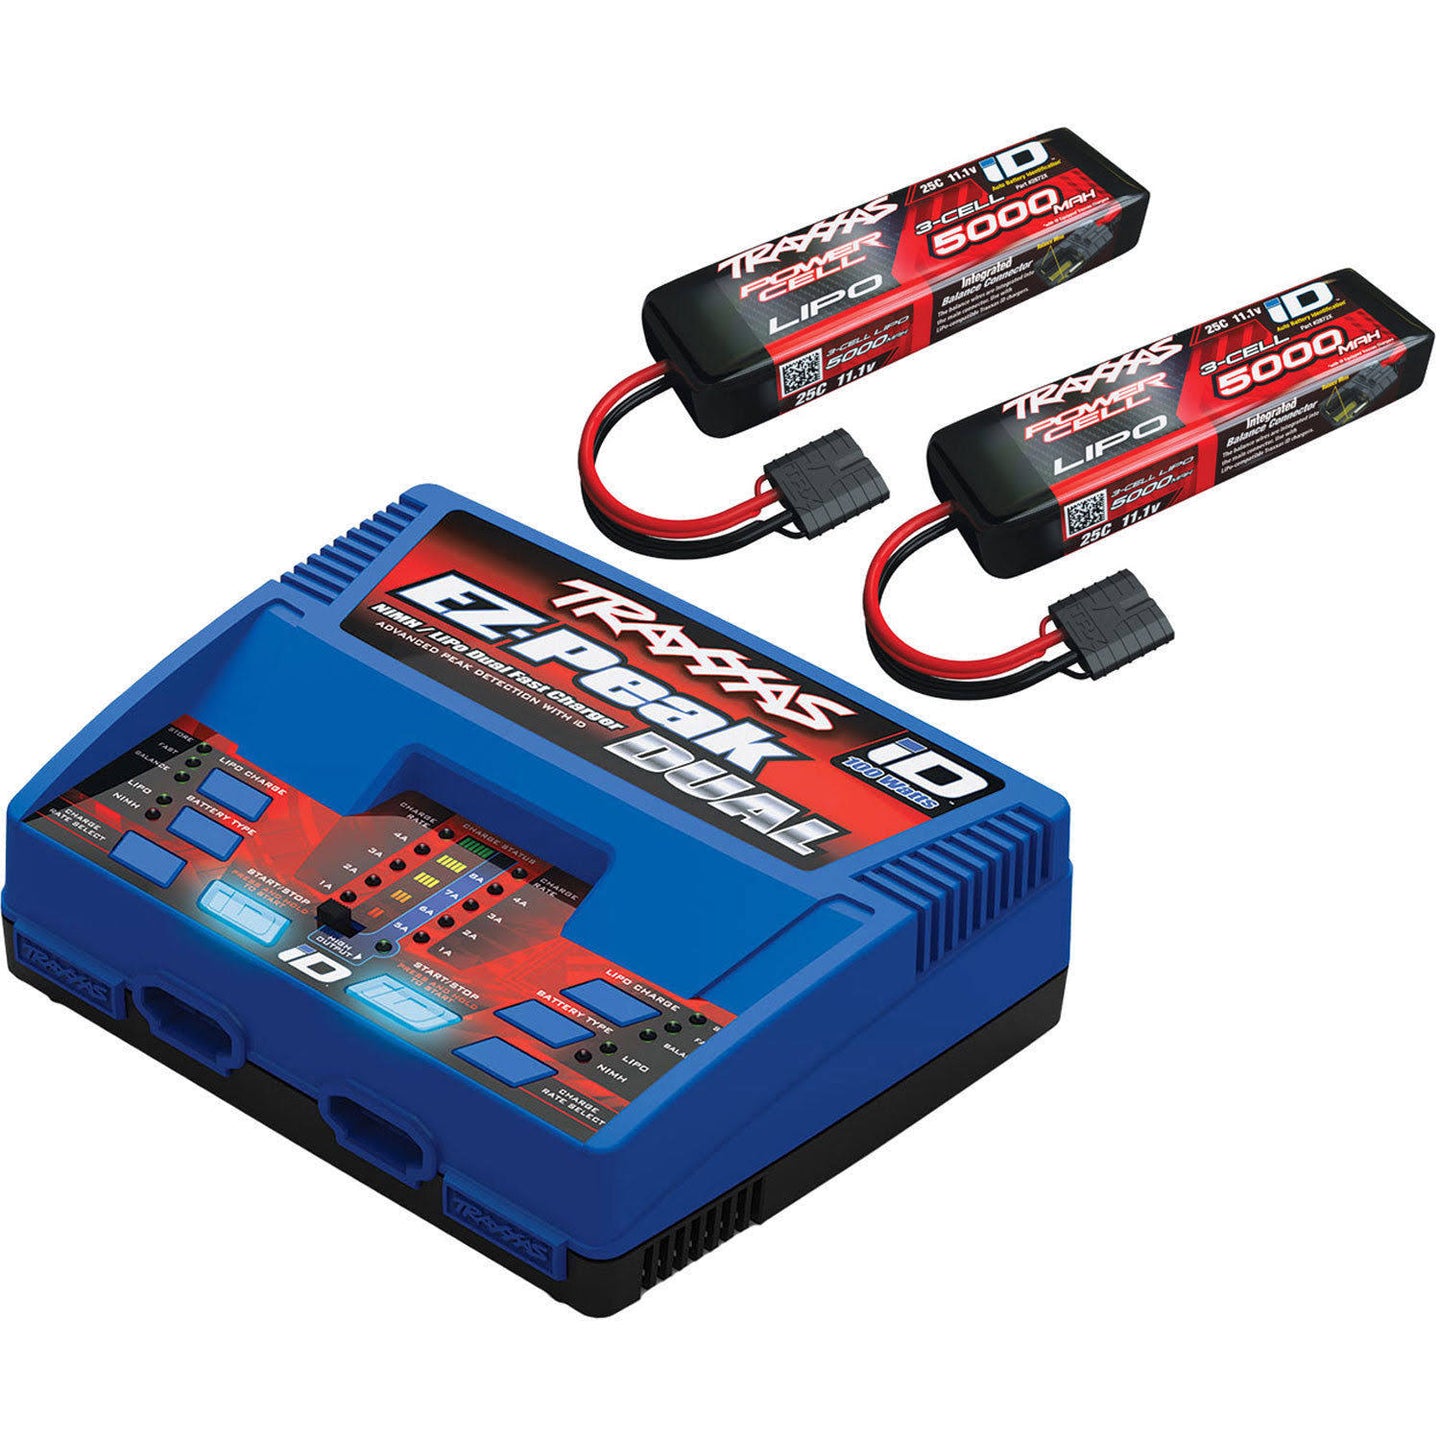 PACK CHARGEUR LIPO : 1 x CHARGEUR 2972X + 2 x LIPO 3S 5000MAH